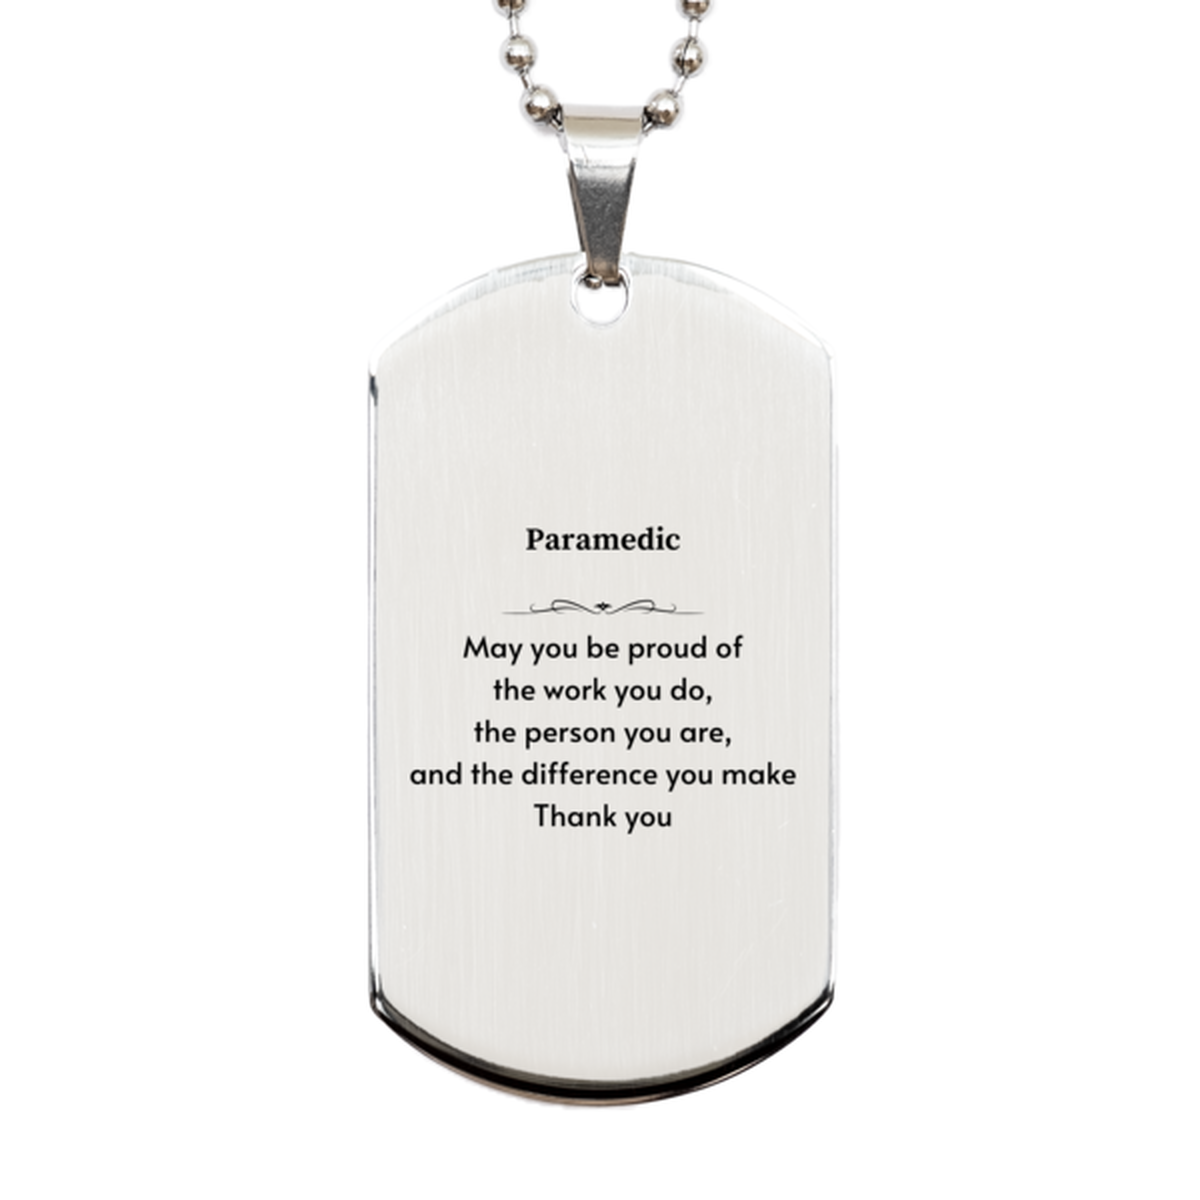 Heartwarming Silver Dog Tag Retirement Coworkers Gifts for Paramedic, Paramedic May You be proud of the work you do, the person you are Gifts for Boss Men Women Friends